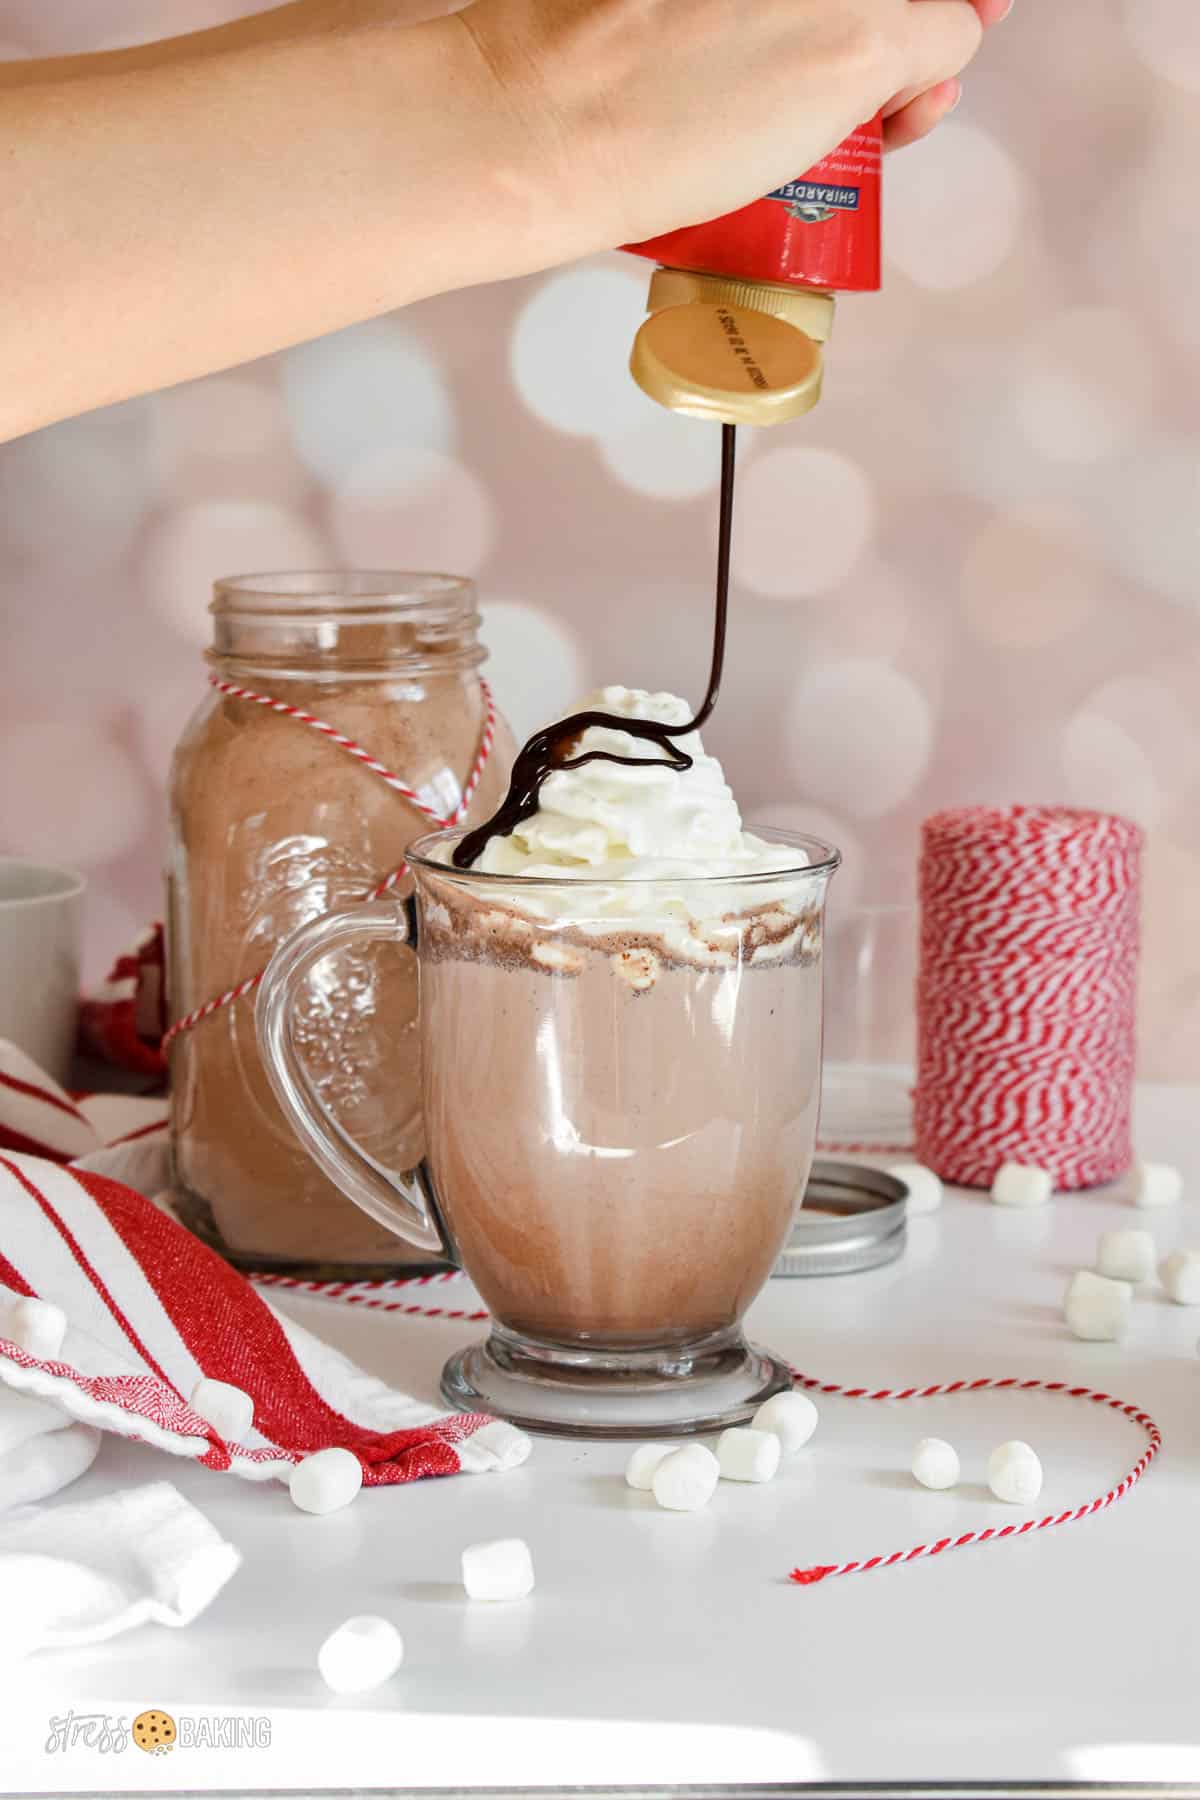 Chocolate syrup being drizzled on top of a mug of hot cocoa topped with whipped cream